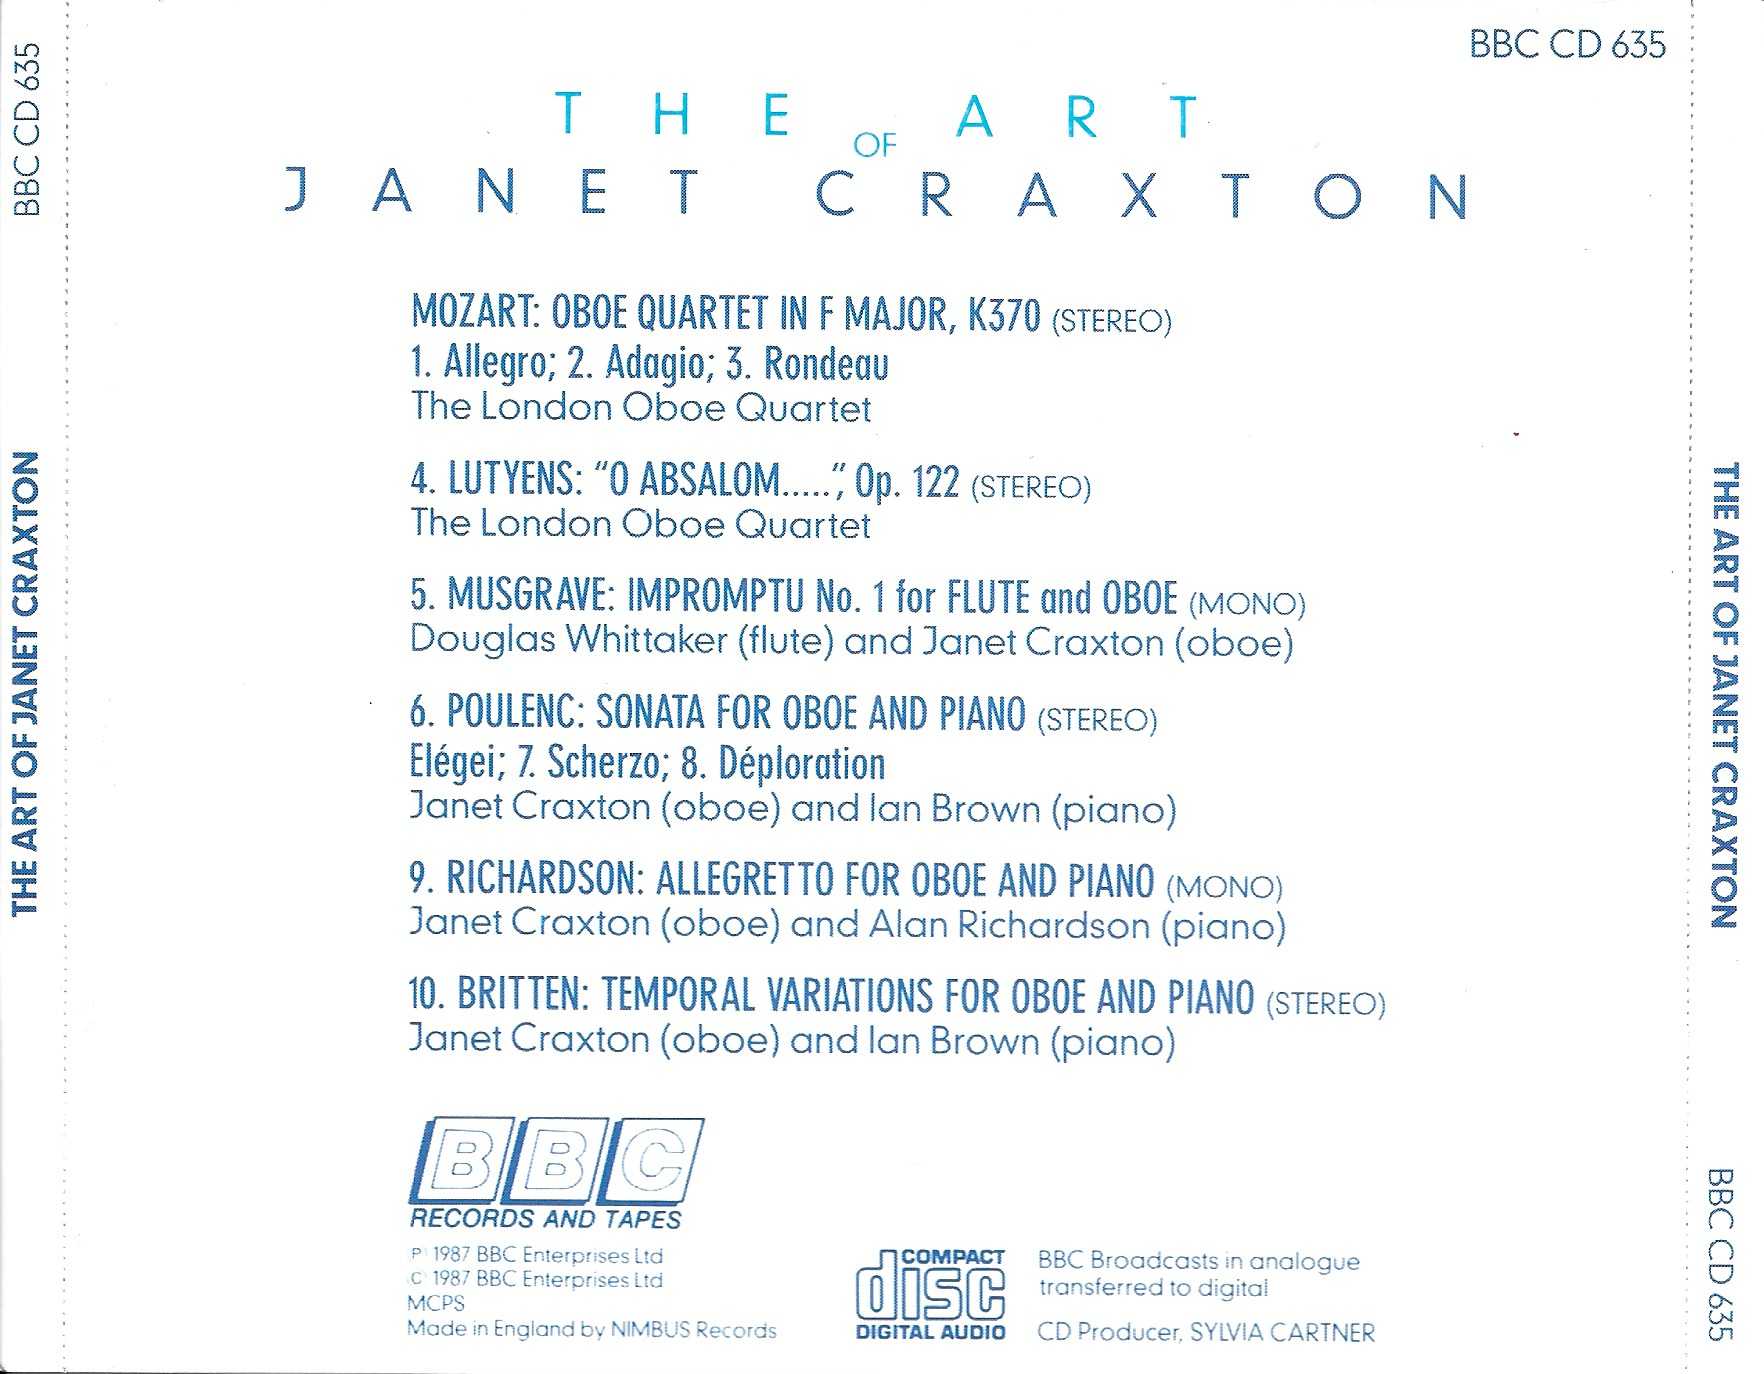 Picture of BBCCD635 The art of Janet Craxton by artist Janet Craxton from the BBC records and Tapes library